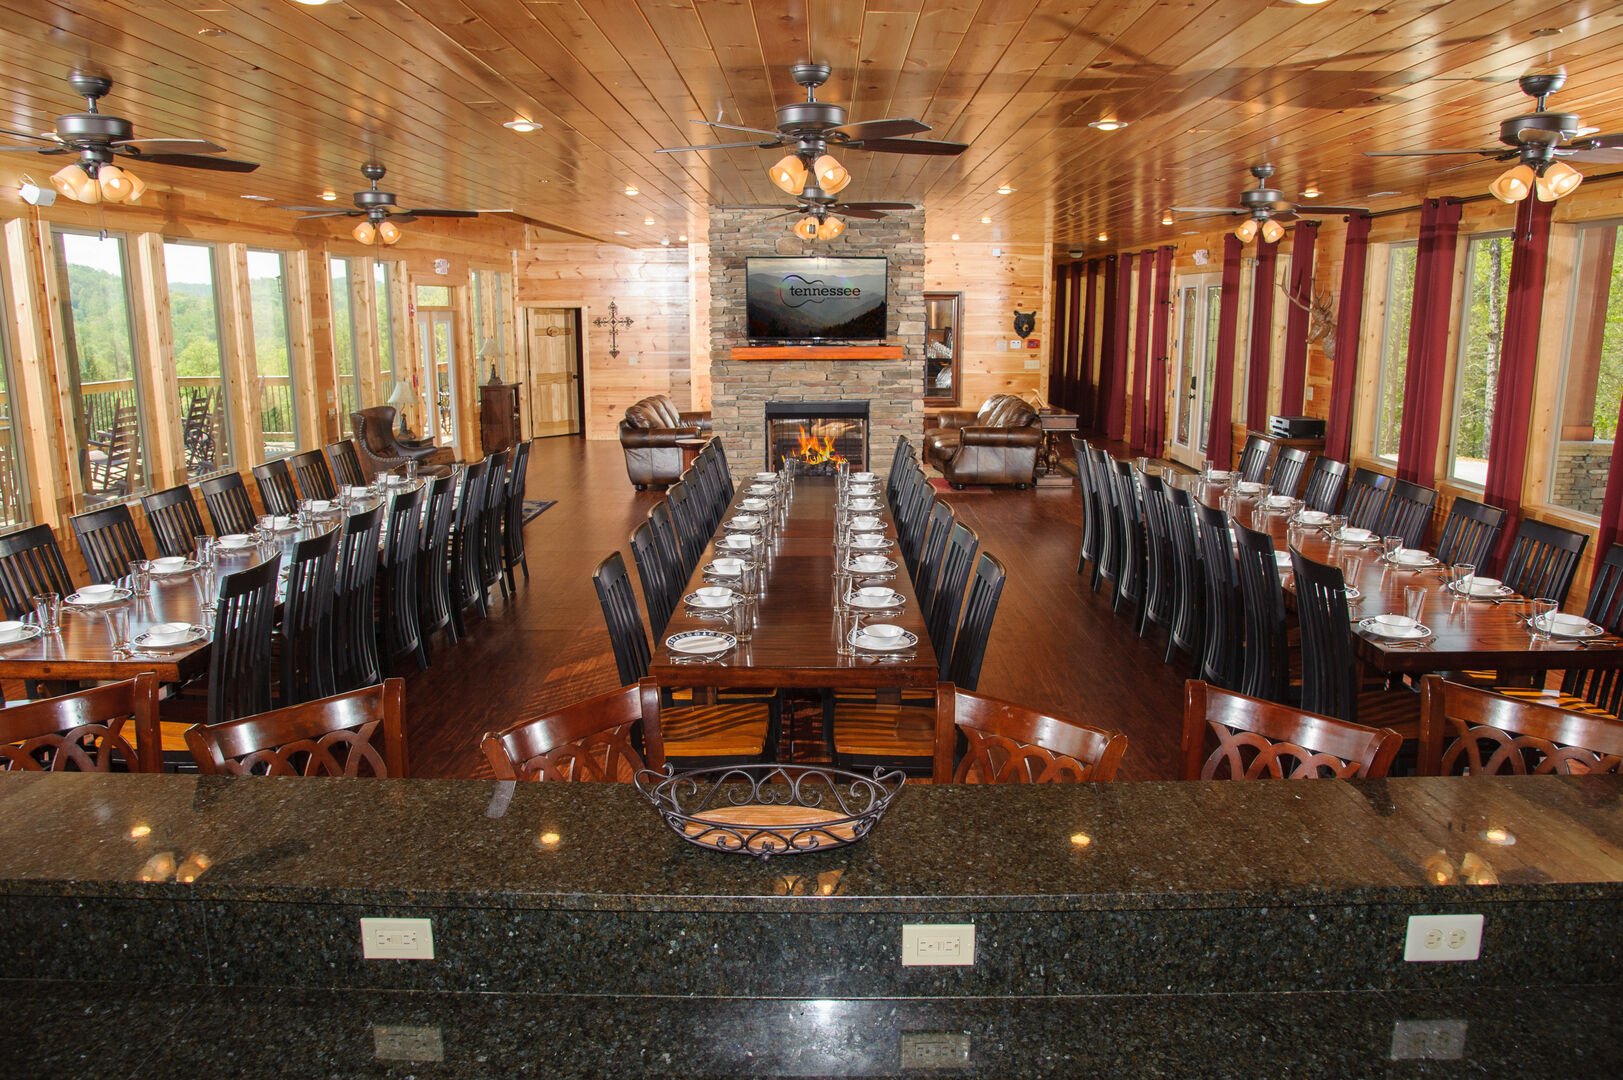 Big Dining Room with Tables, Chairs, Fireplace, and TV.